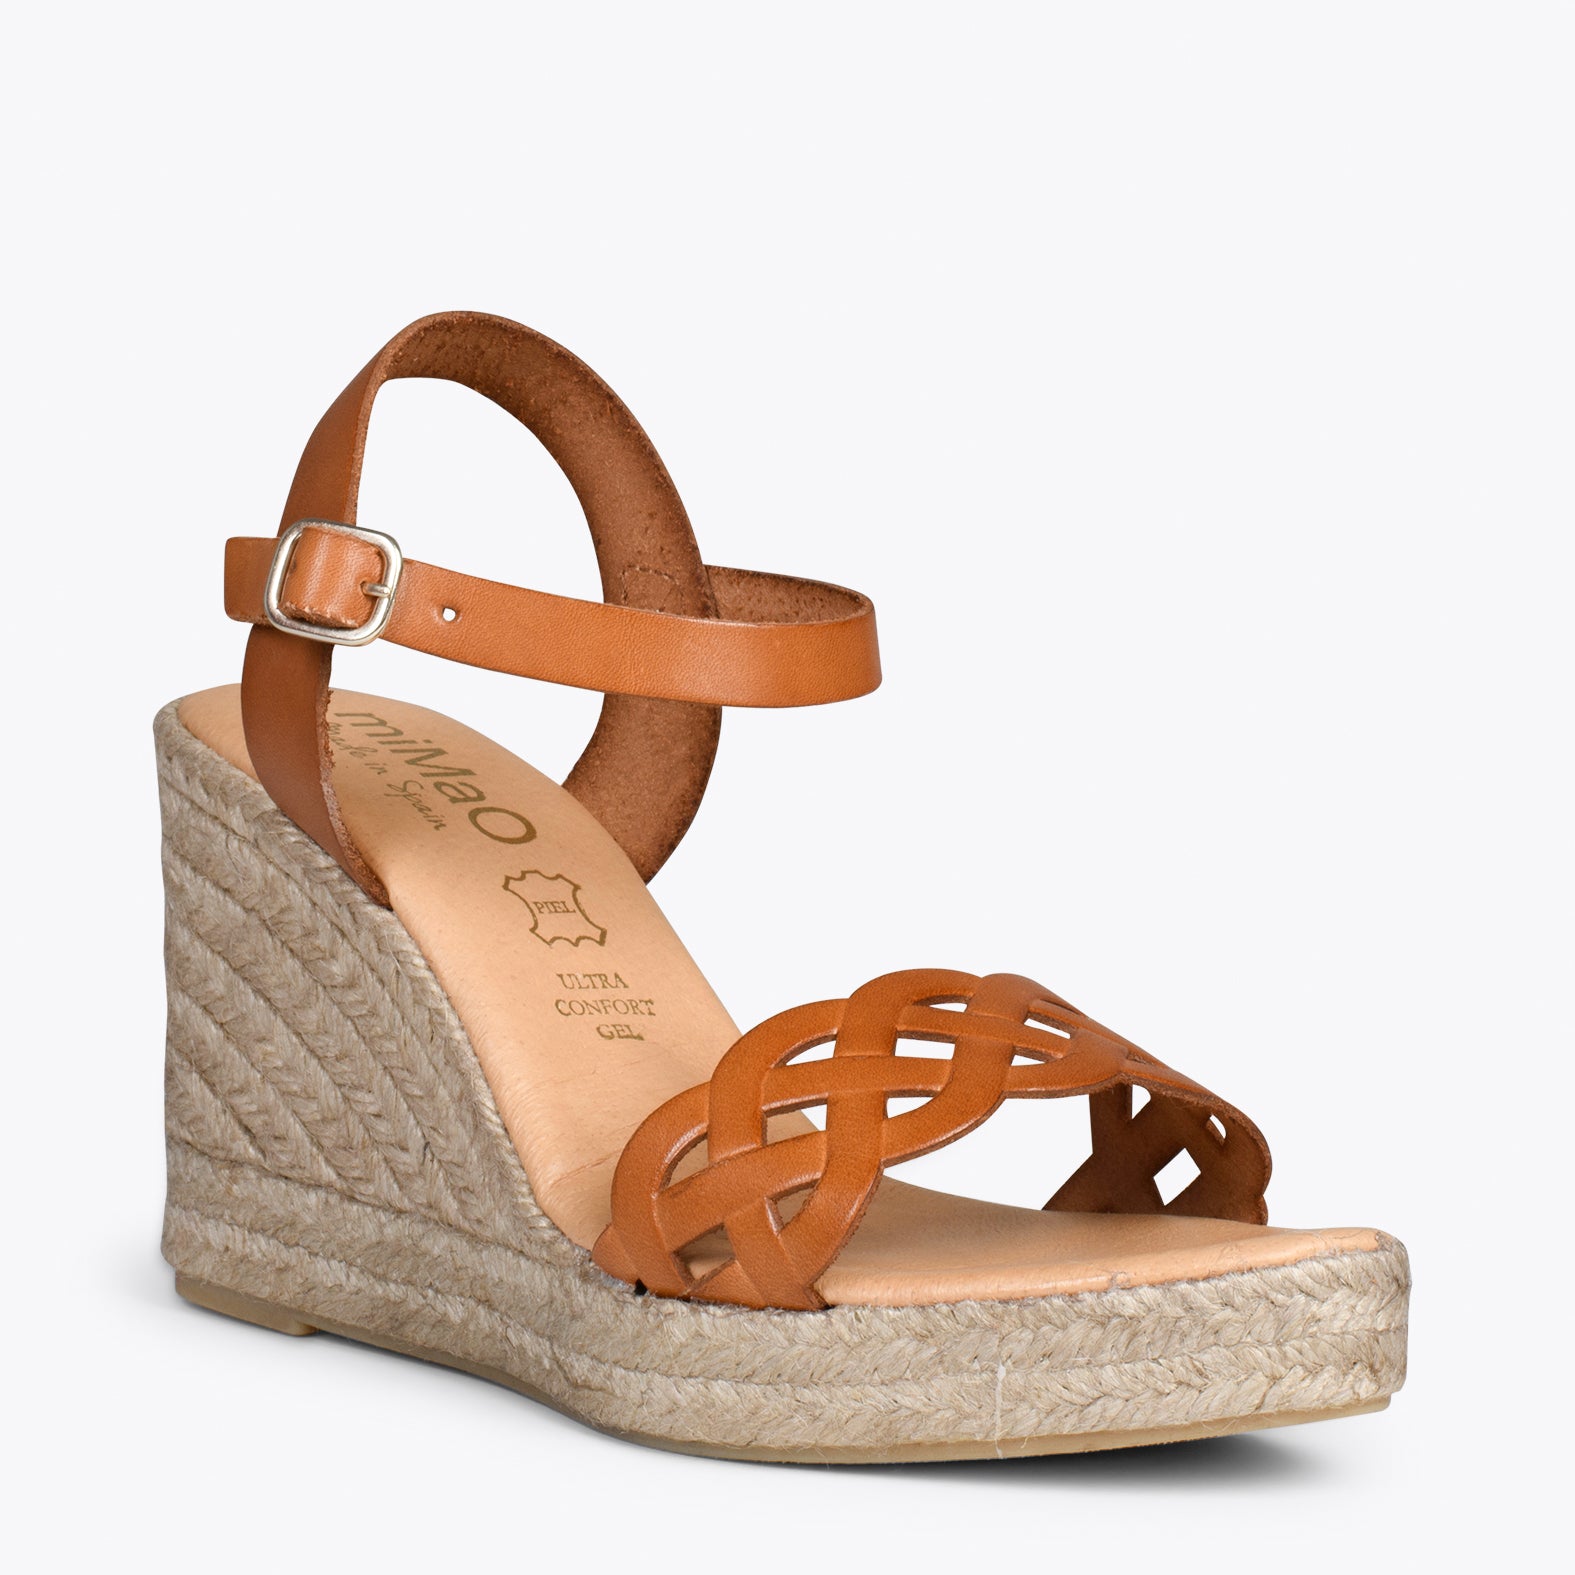 OASIS – CAMEL espadrille wedges with braided front